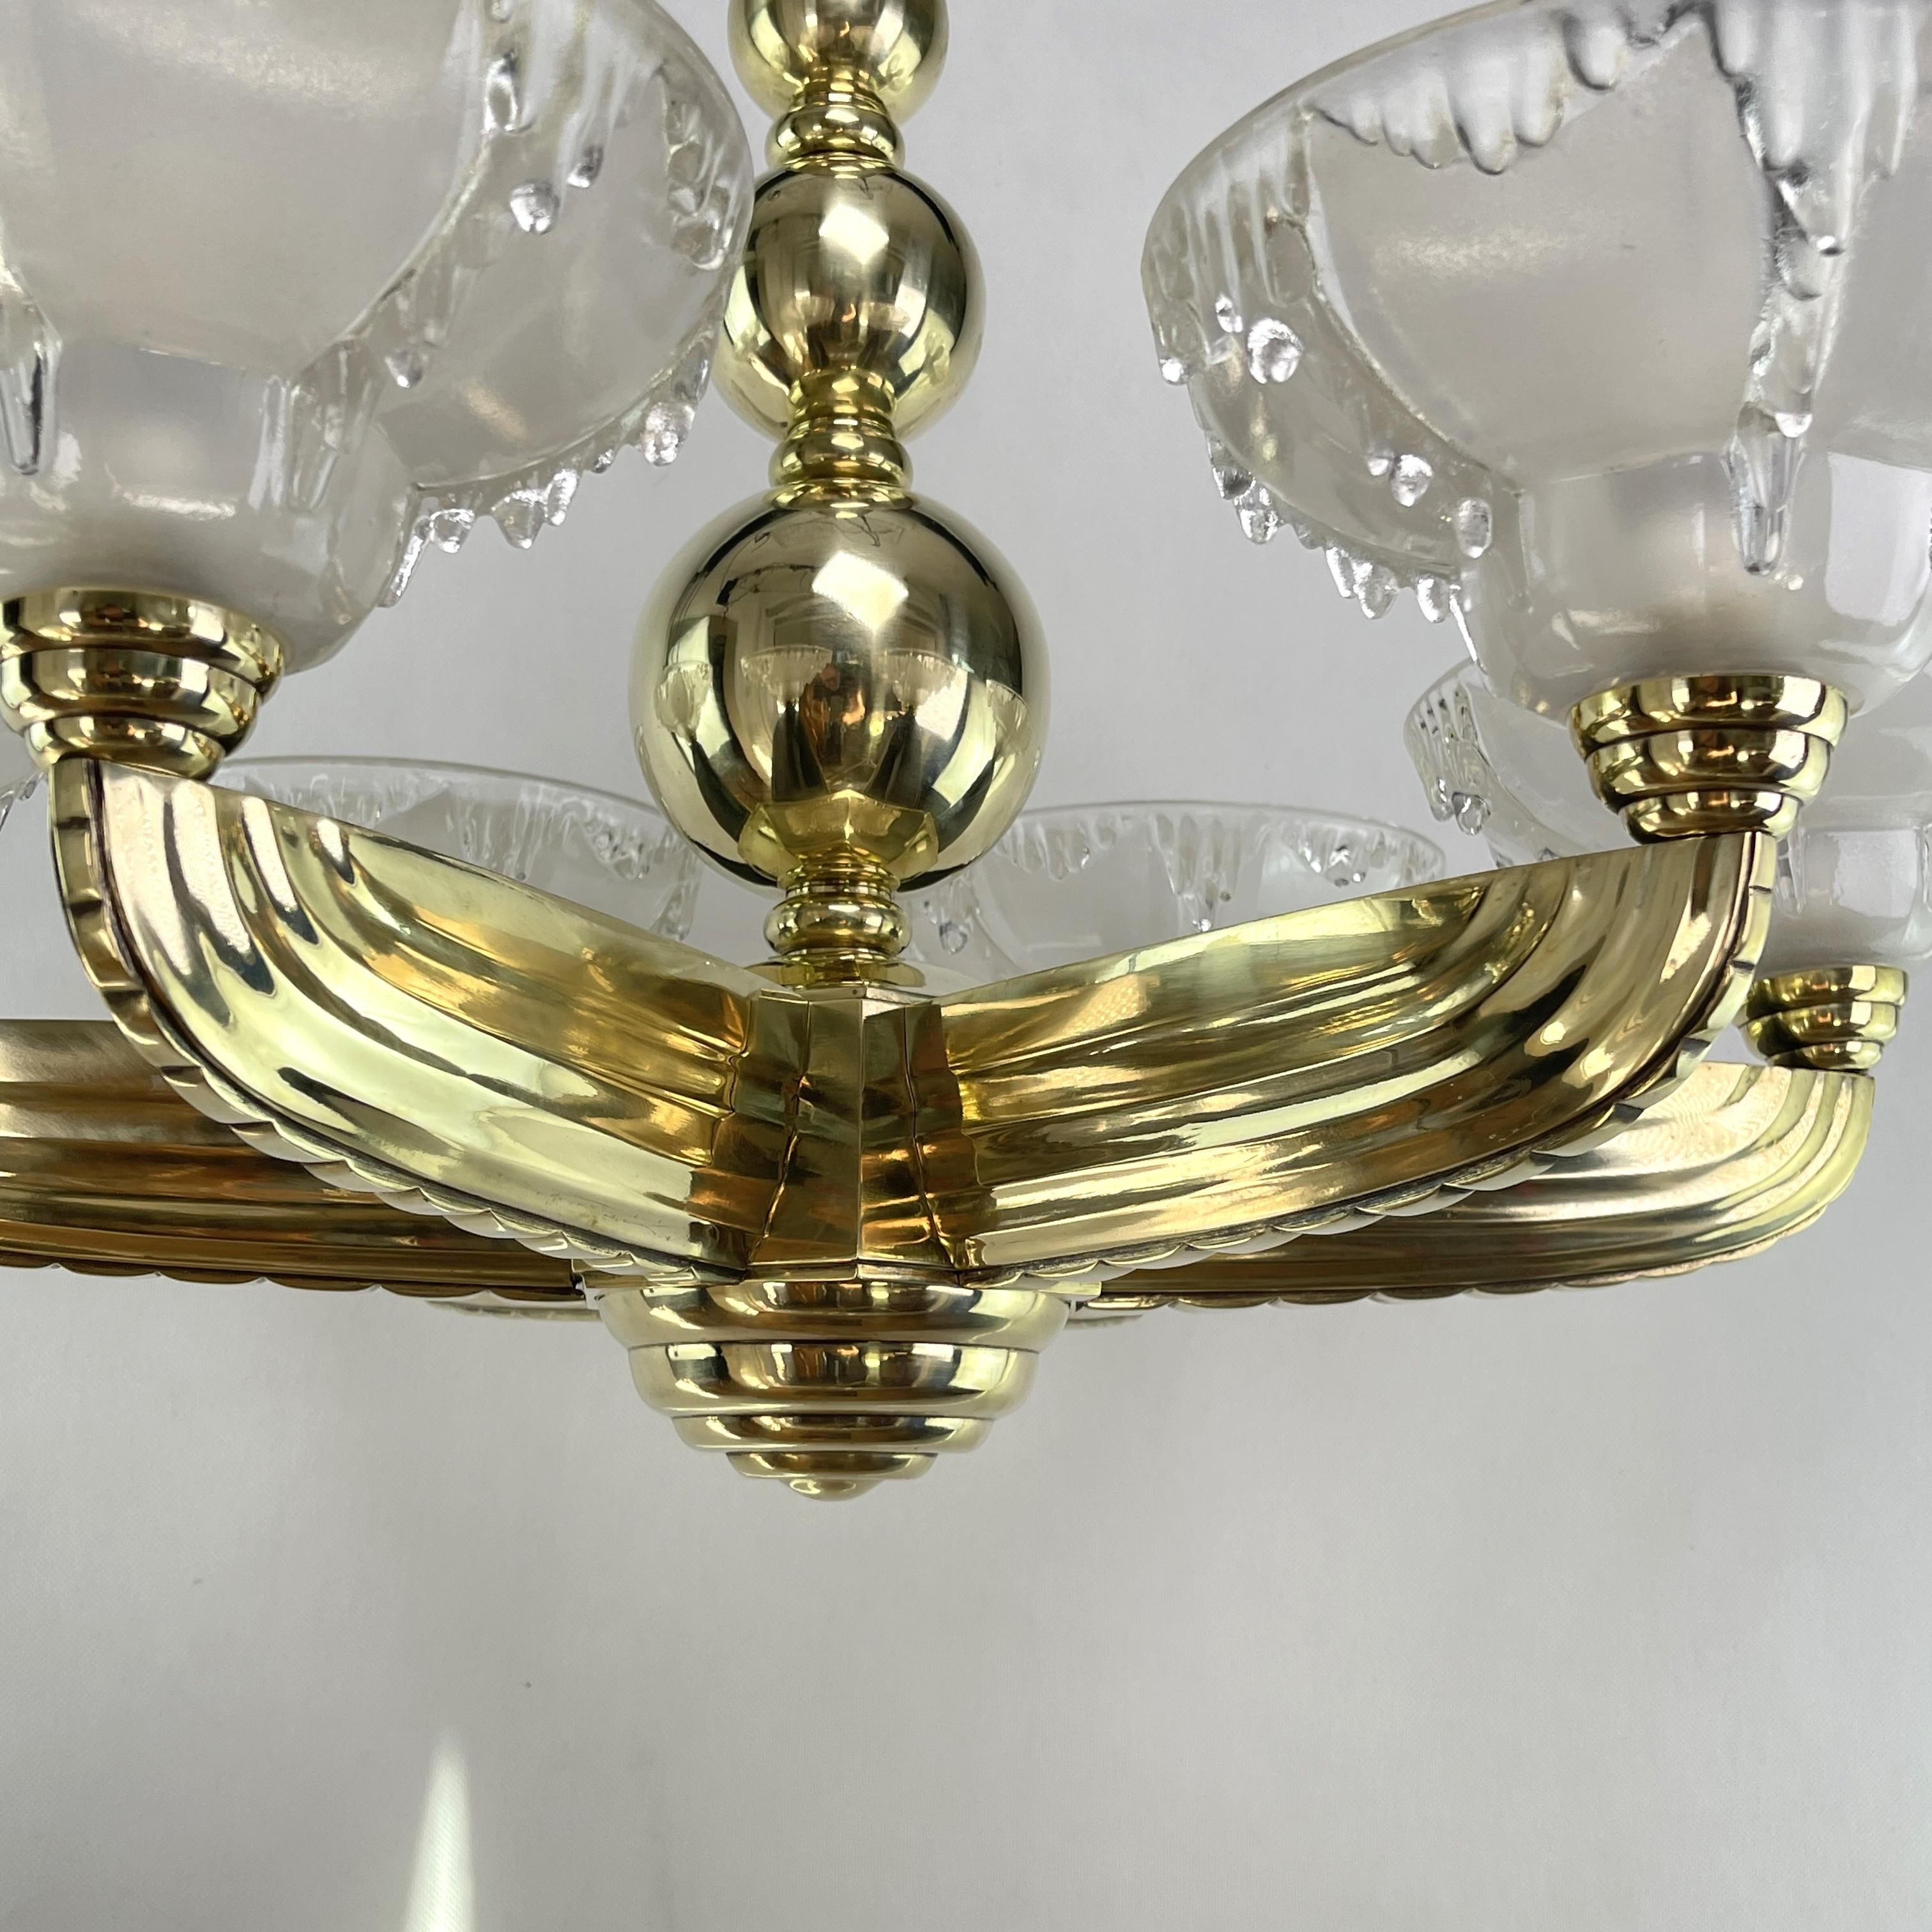 Mid-20th Century Art Deco Ceiling Lamp from Petitot & Ezan, 1930s For Sale